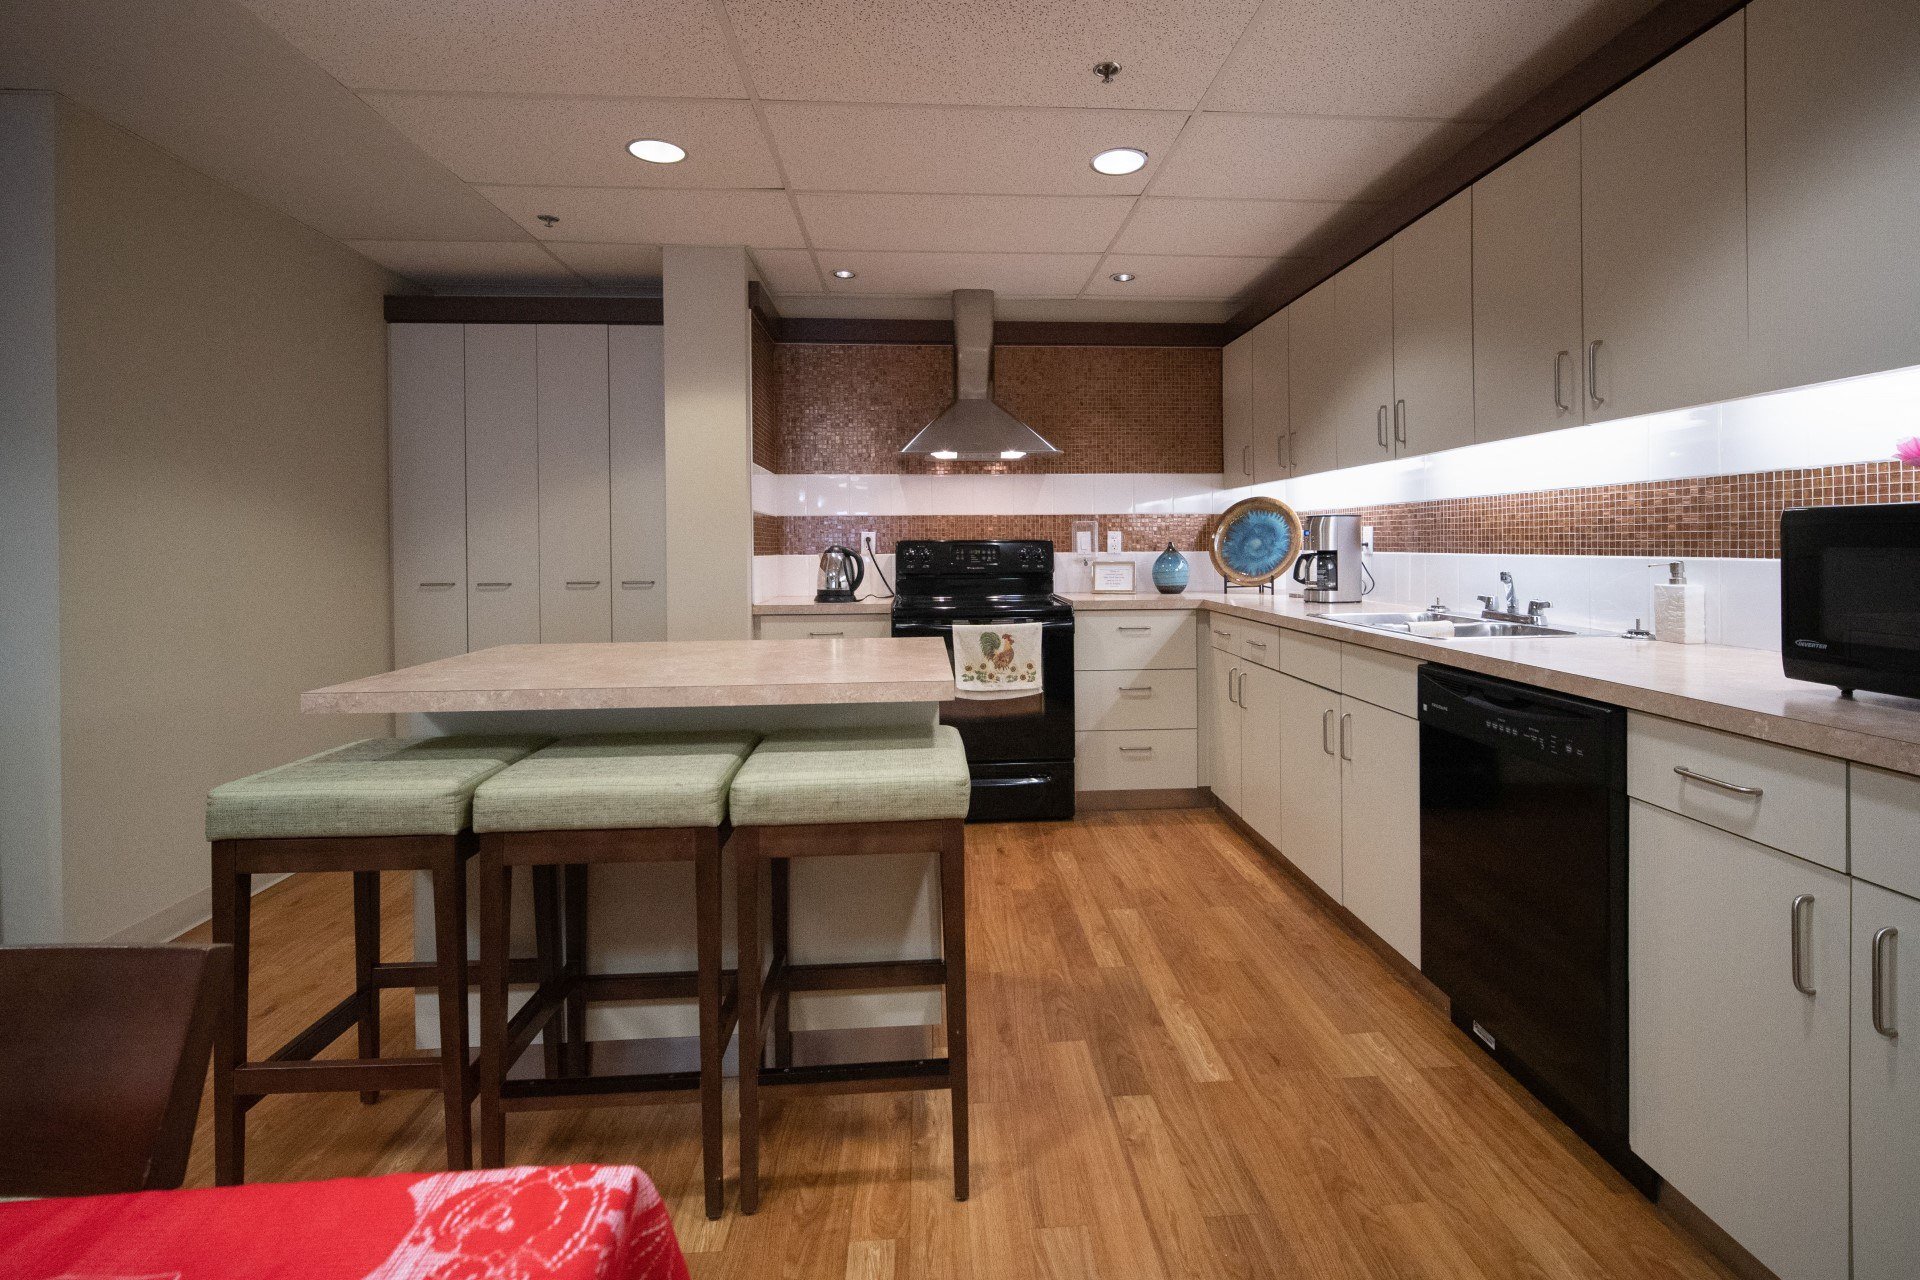 Shared common area with full kitchen at Willow Park on the Bow